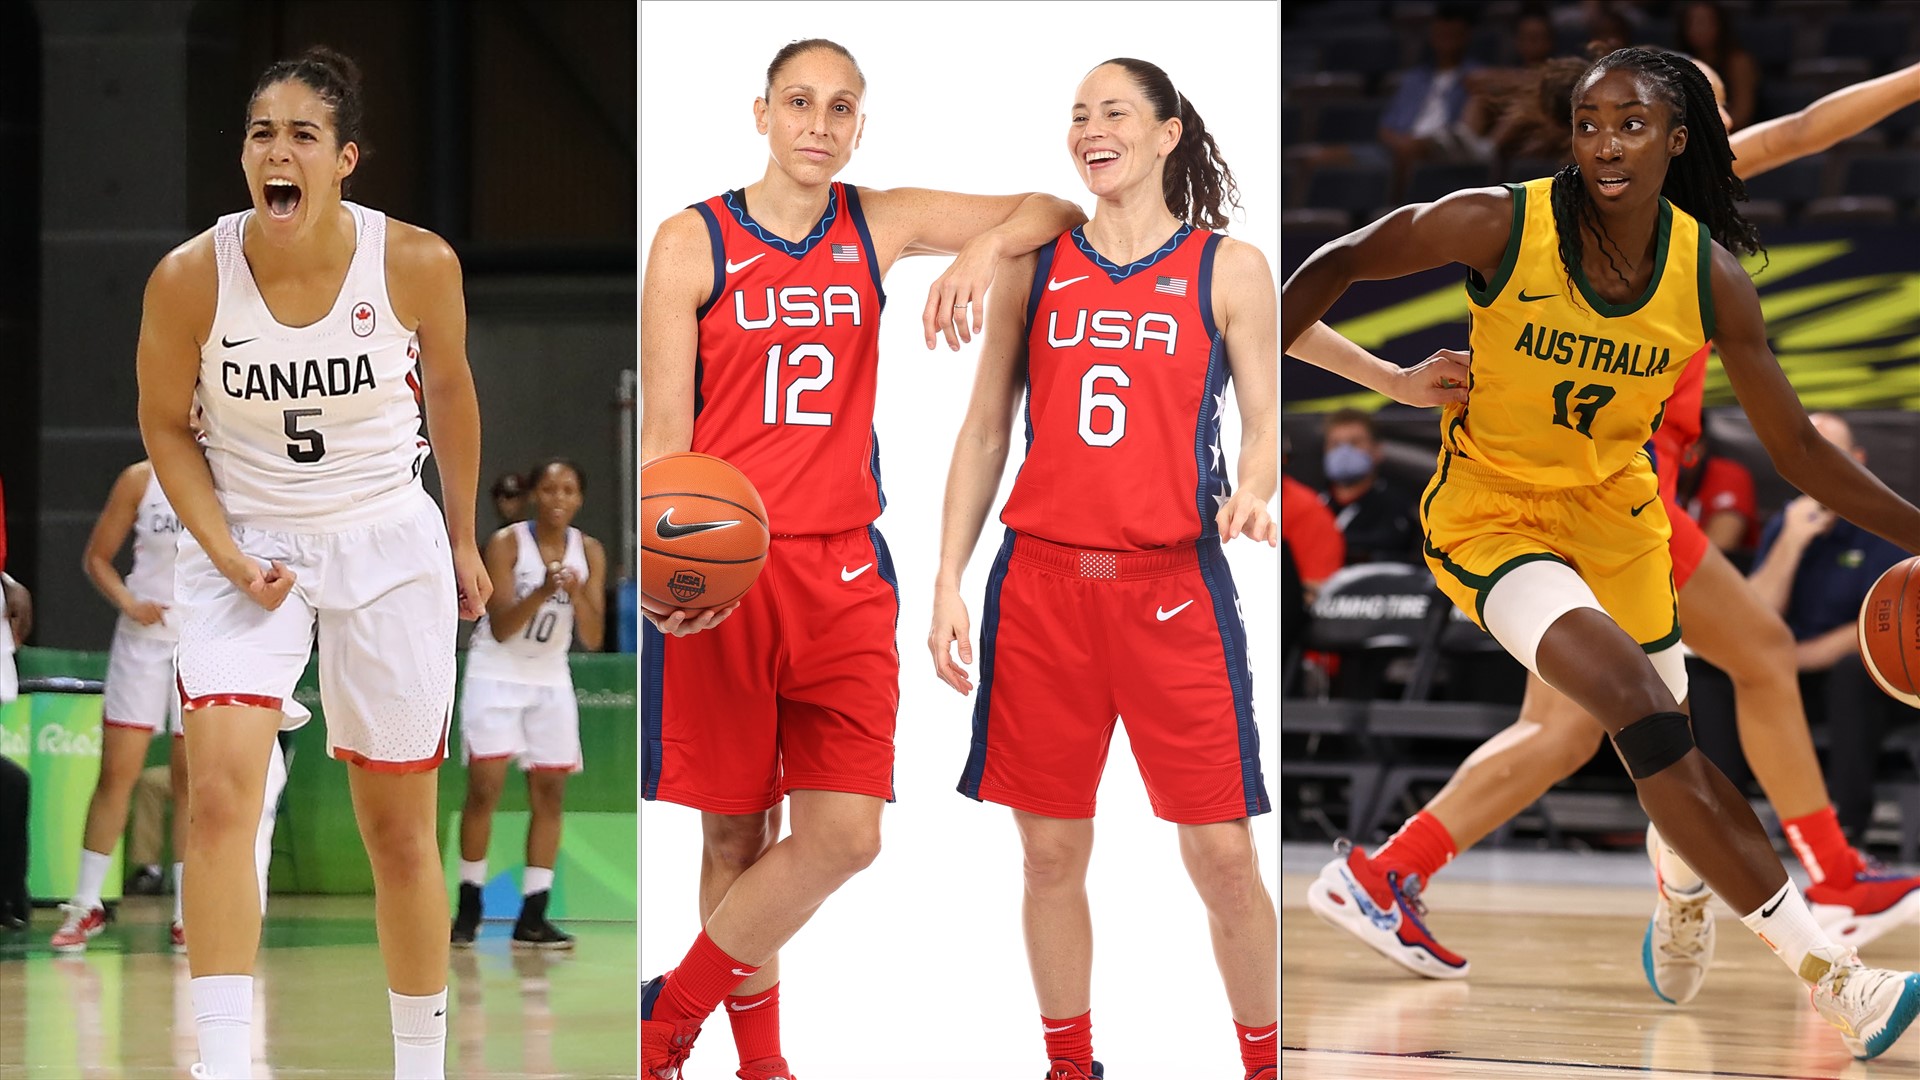 Women's Basketball Guide to the Tokyo 2020 Olympic Games: Groups, Rosters, WNBA Figures, Matches and More |  NBA.com Argentina |  The Official Site of the NBA